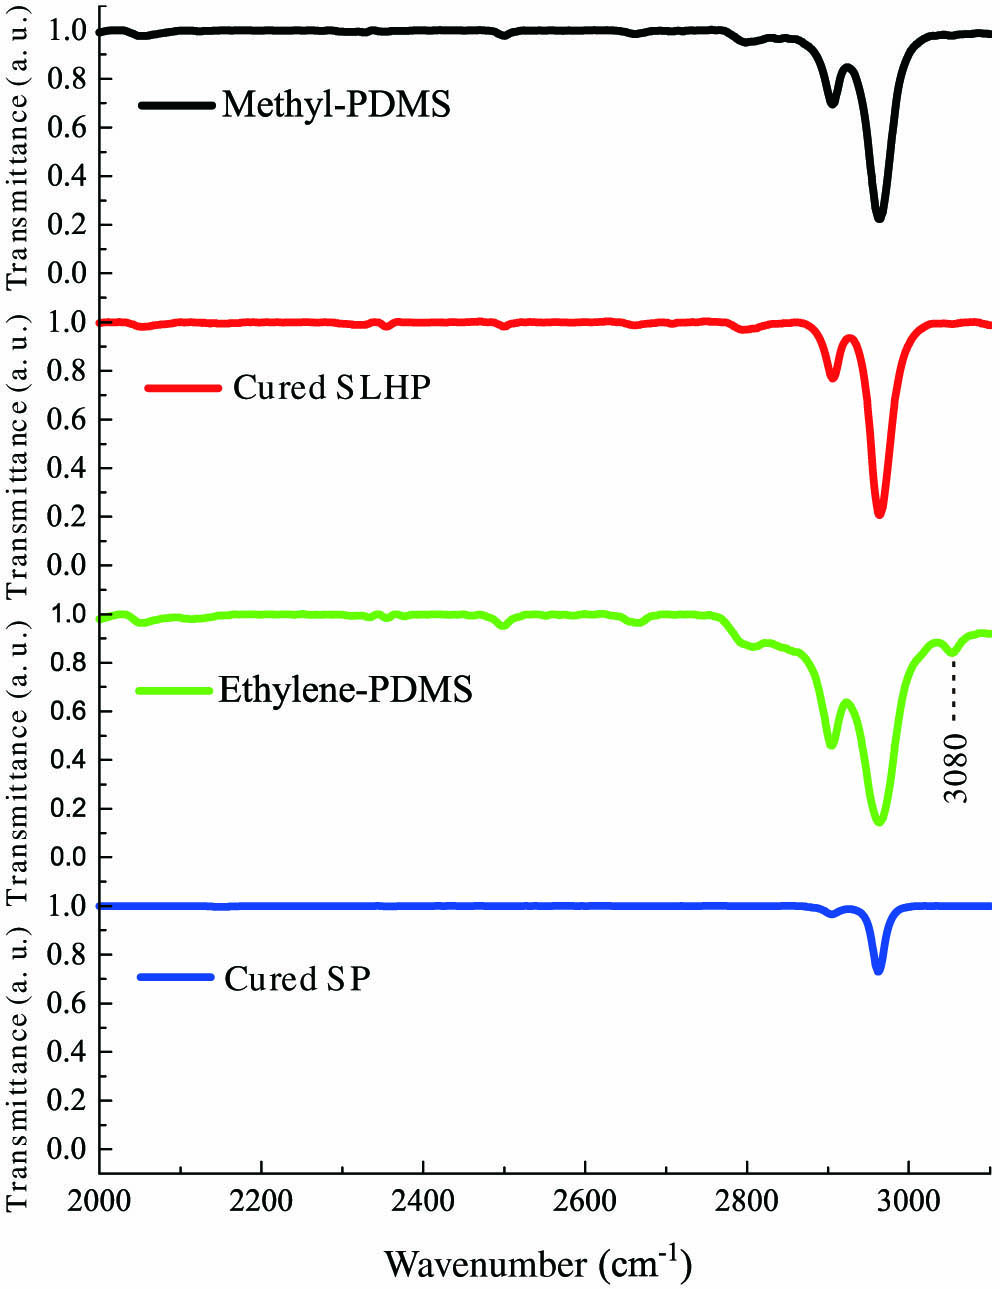 Infrared transmittance spectra of methyl-PDMS, ethylene-PDMS, cured SP, and cured SLHP with 15 wt. % methyl-PDMS.